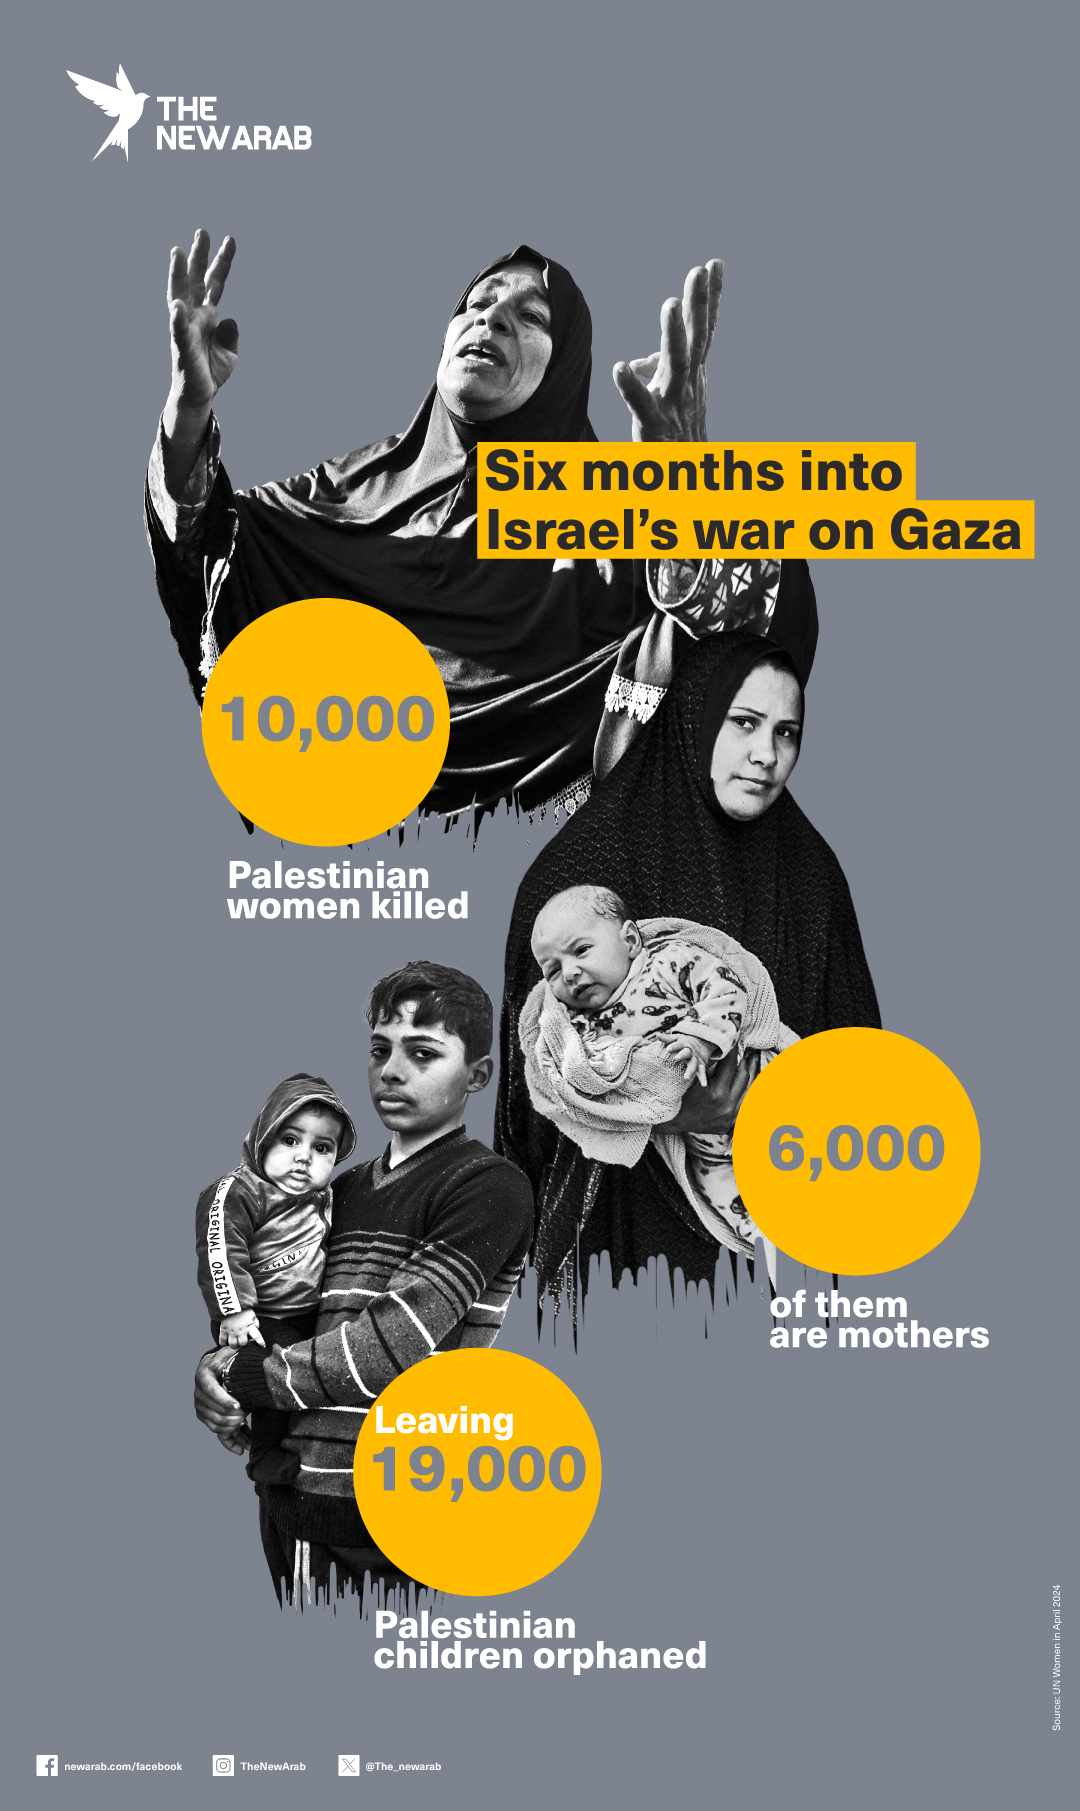 Six months into Israel's war on Gaza